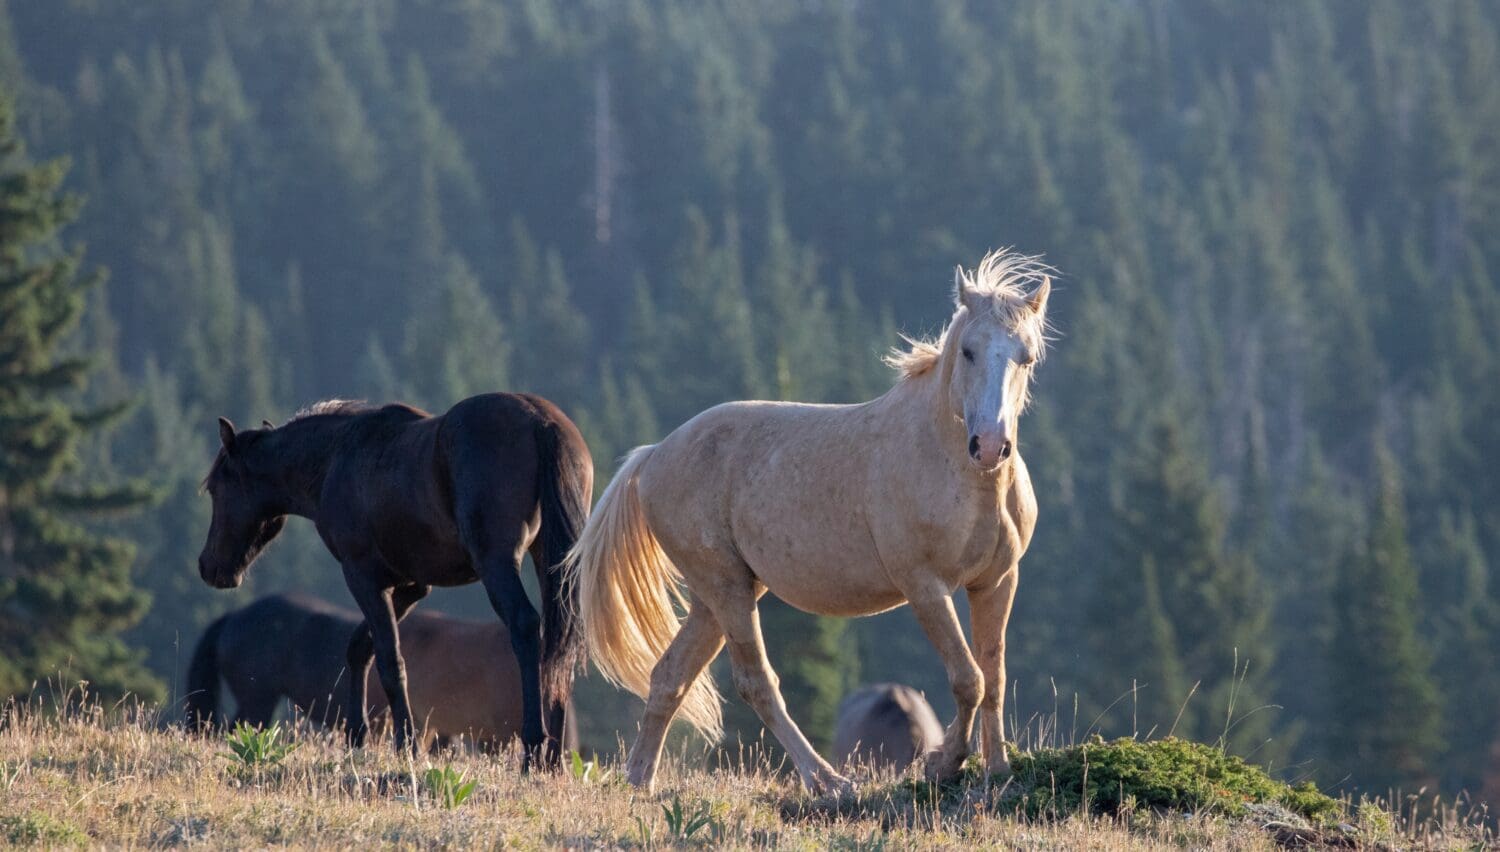 Wild Horse Palomino Stallion posturing and prancing before fighting in the Pryor Mountains Wild Horse Range on the border of Wyoming Montana in the United States